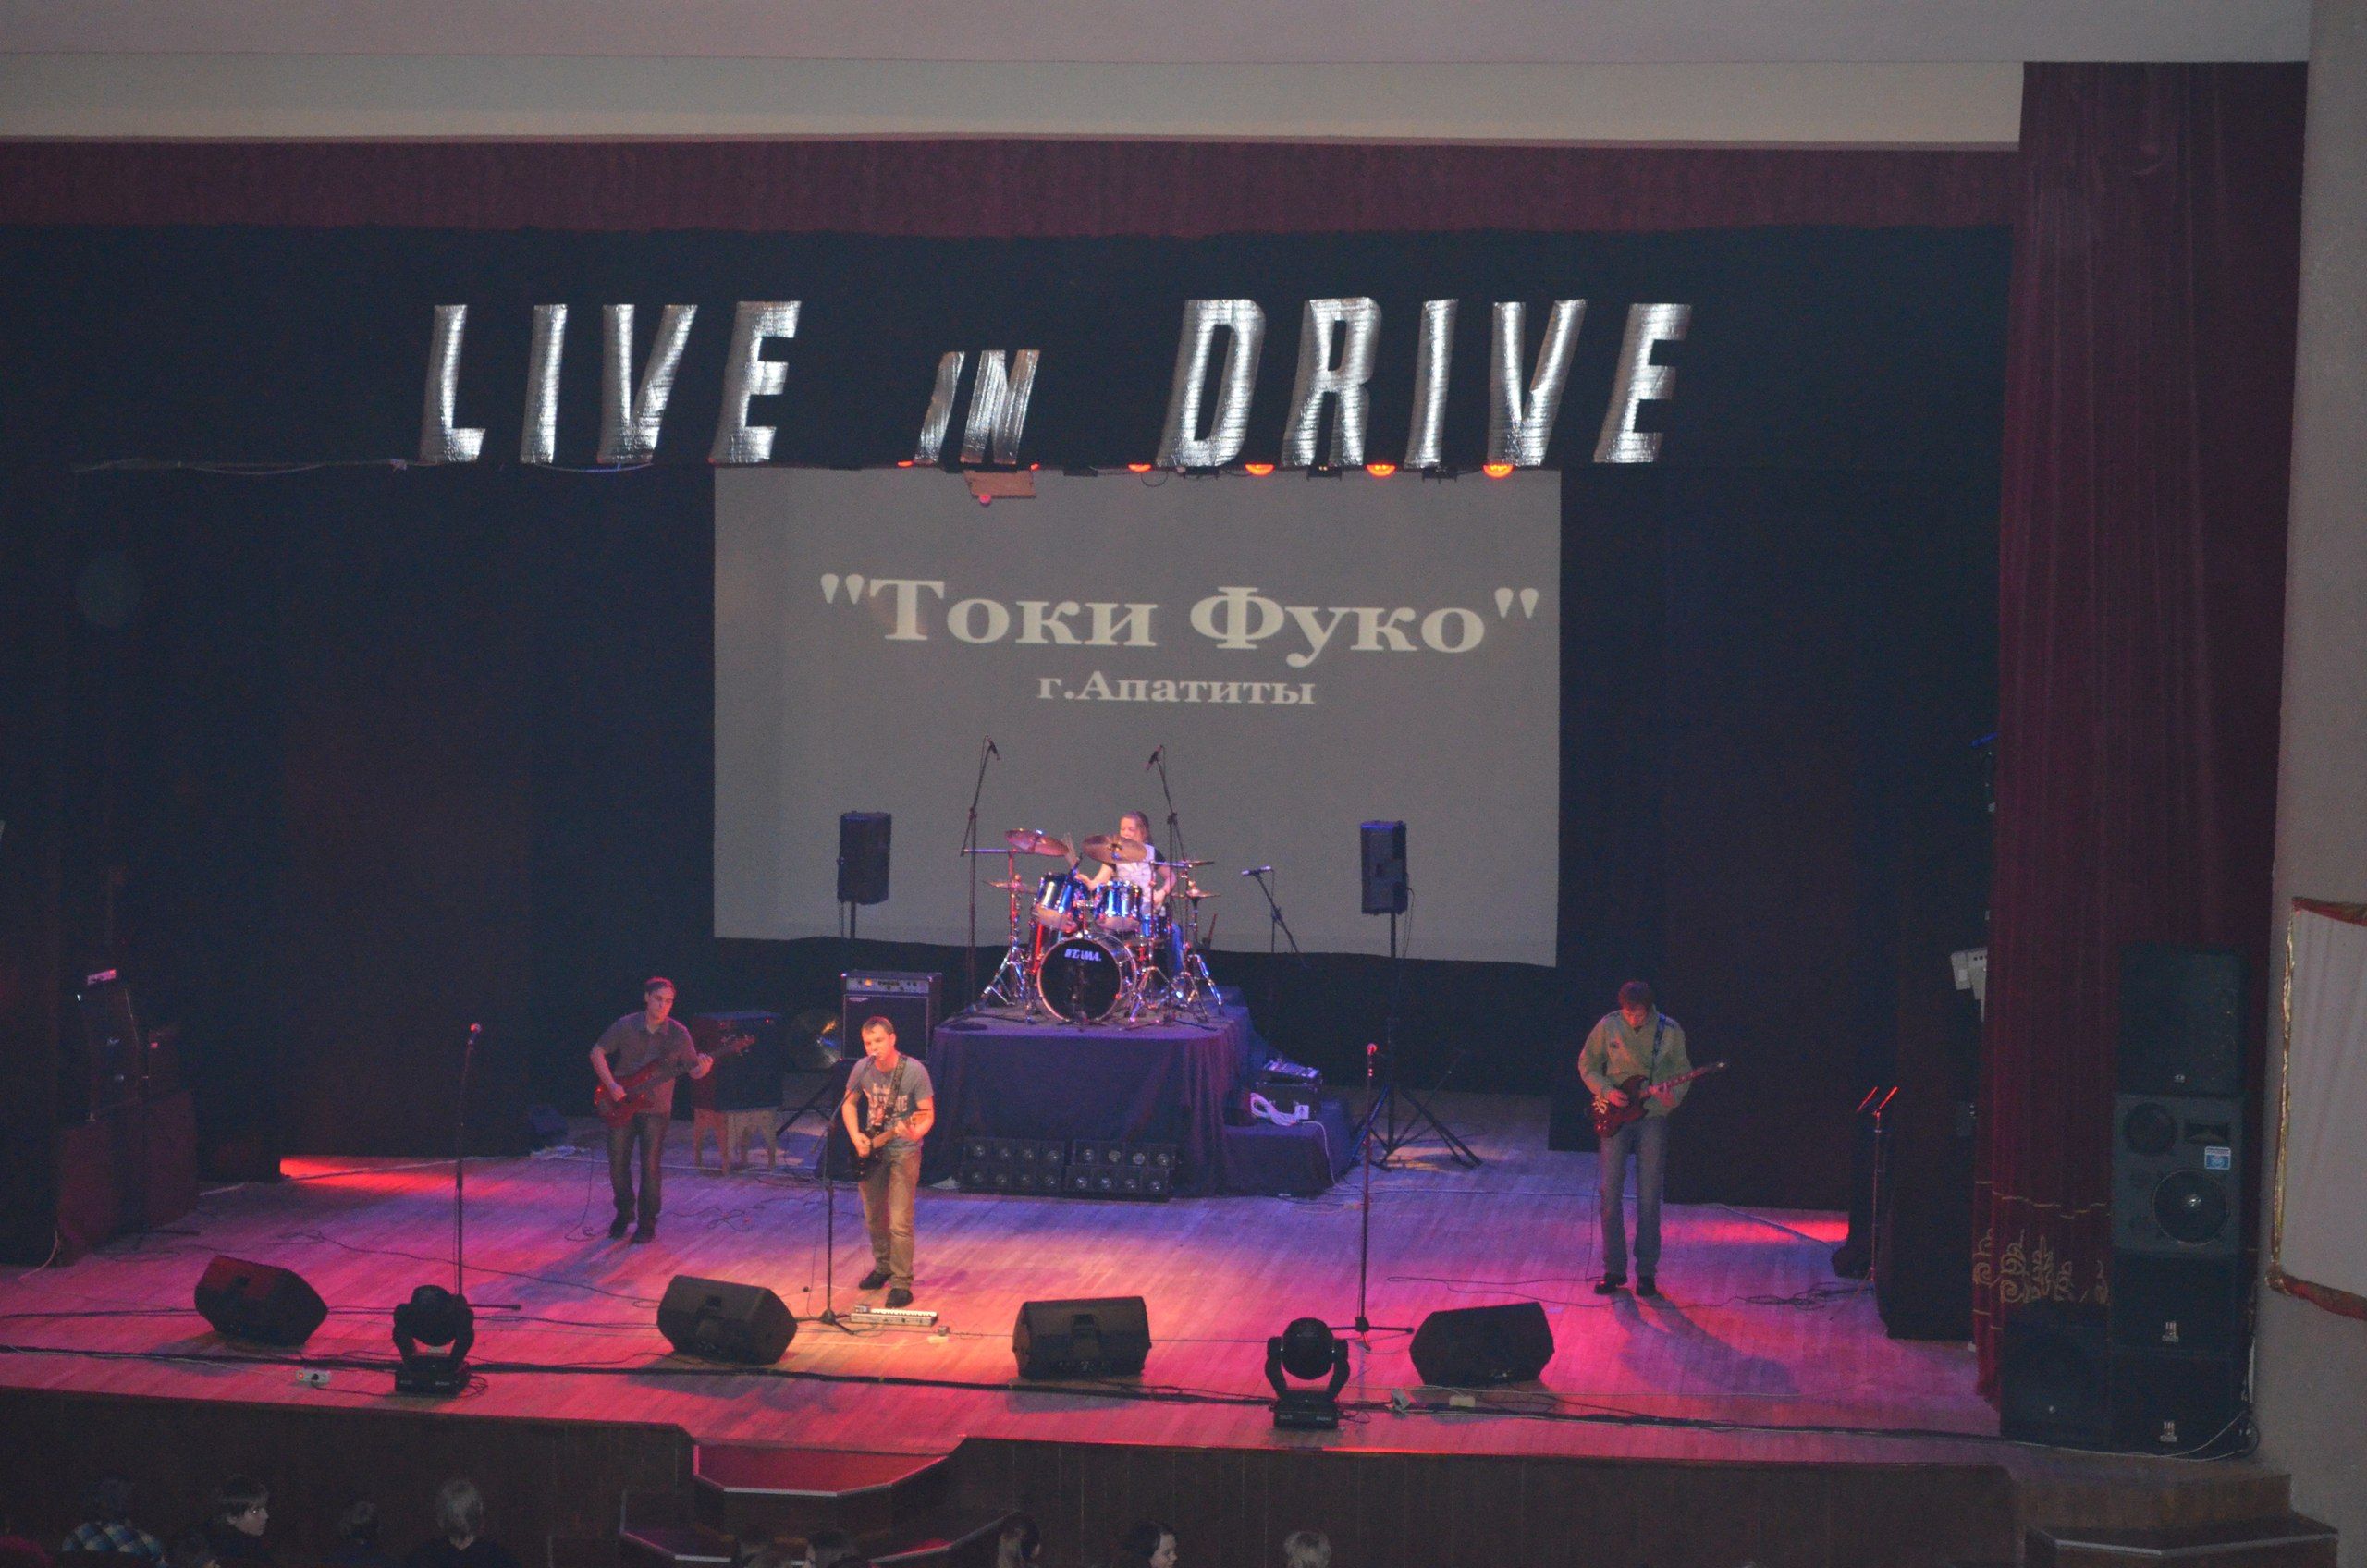 Live in Drive 2013 75